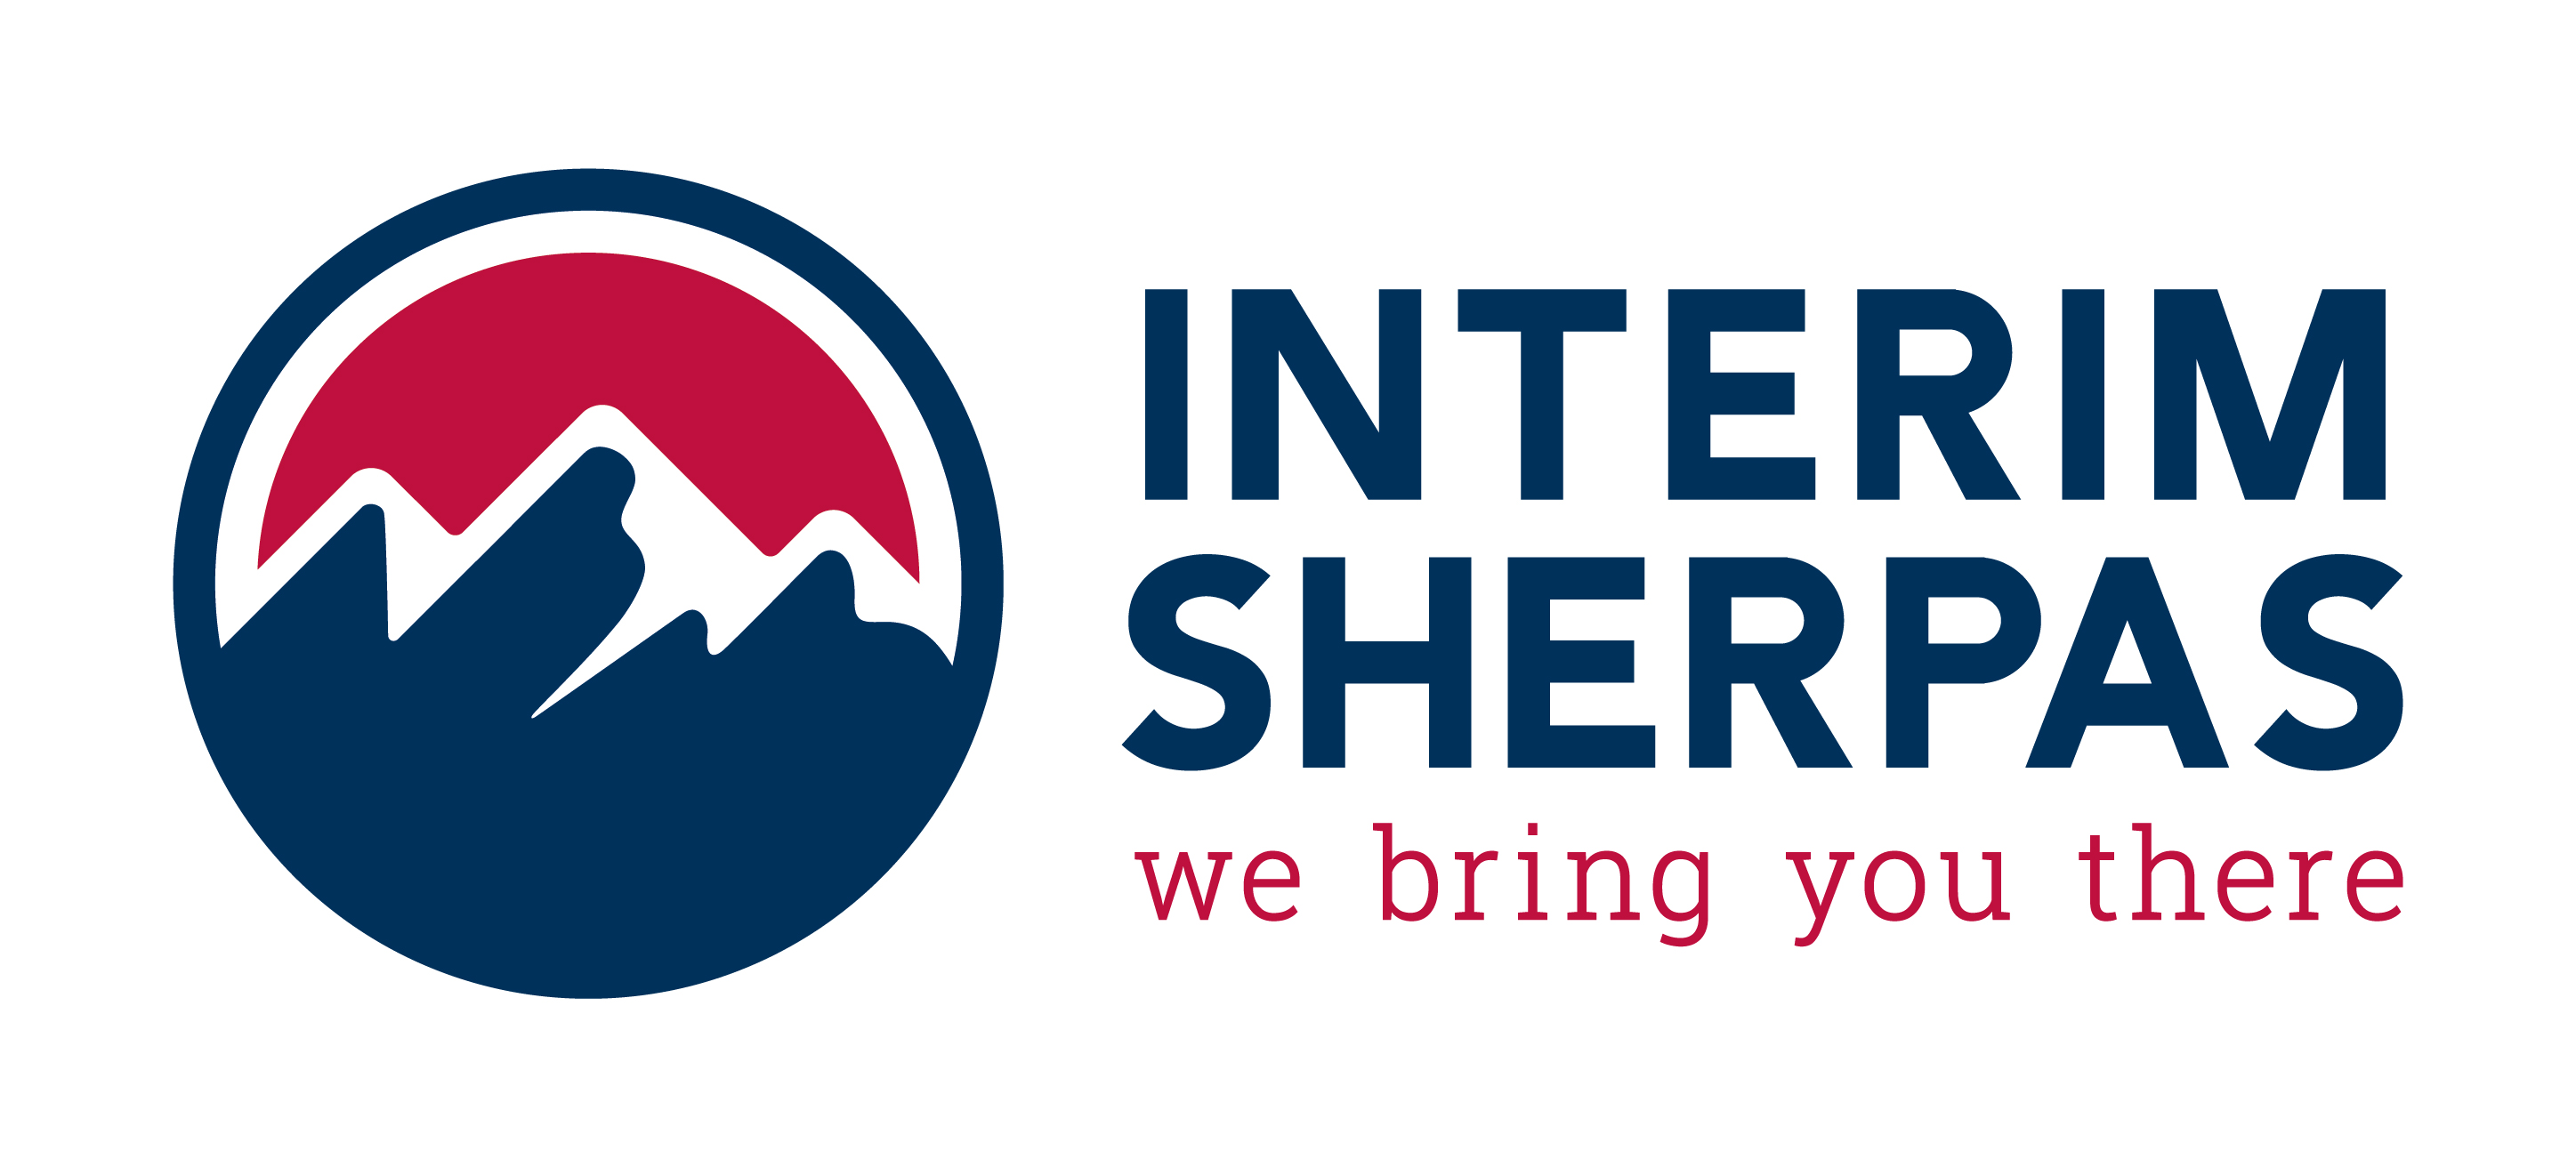 INTERIM-SHERPAS - we bring you there